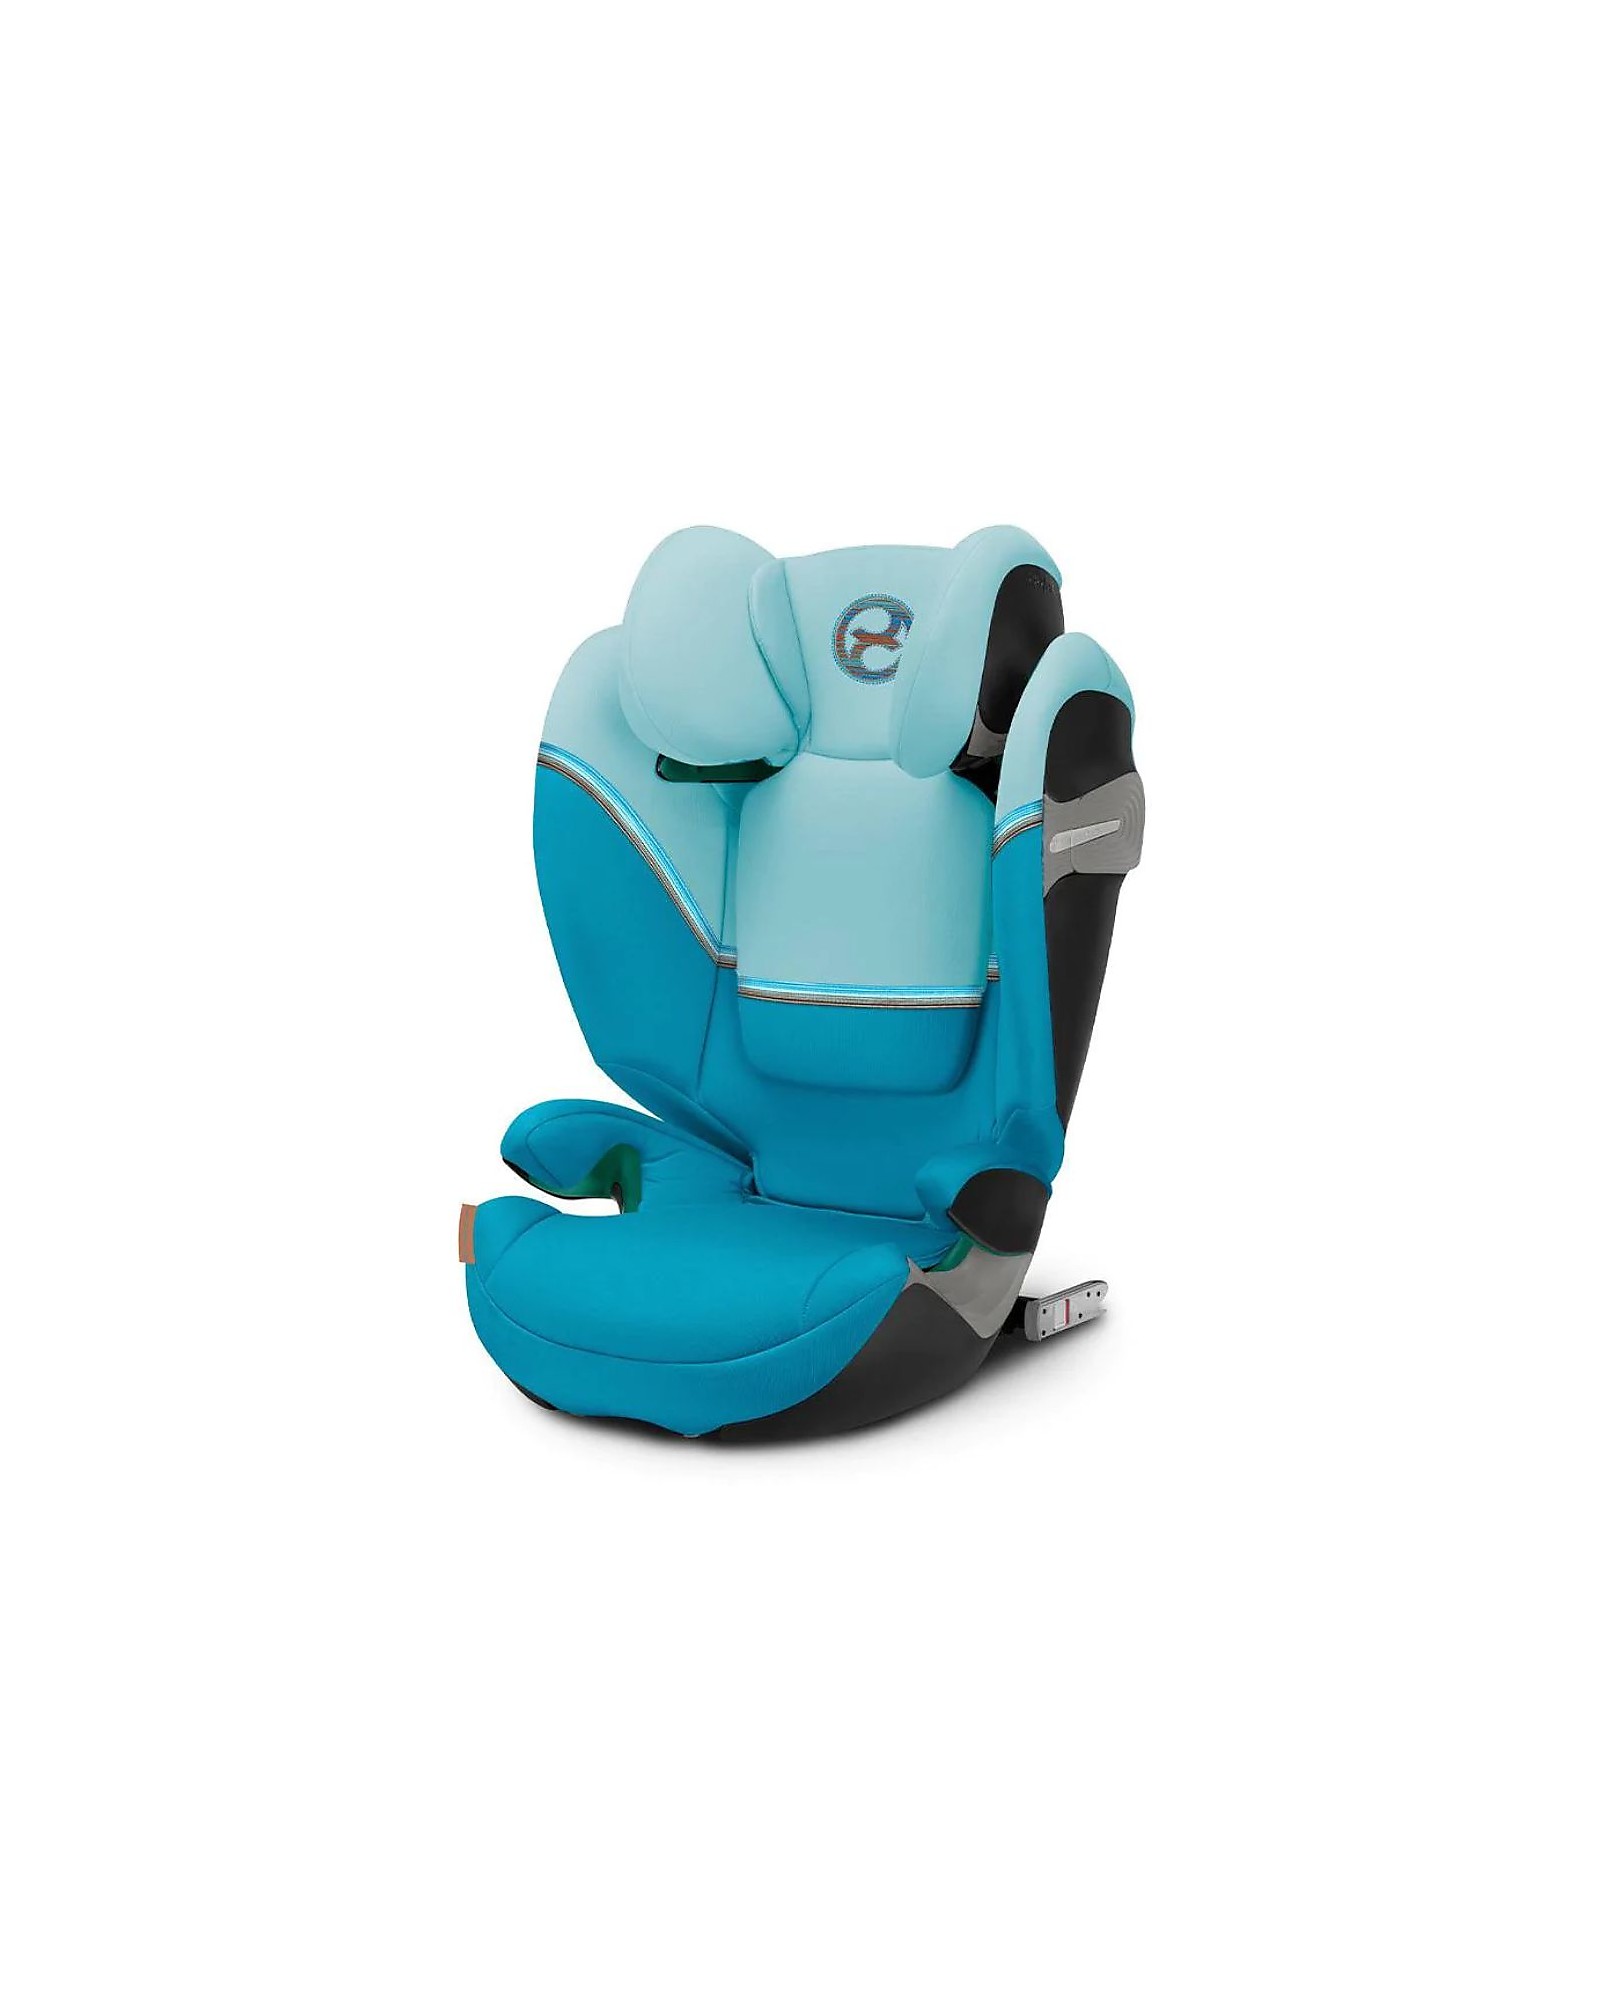 Cybex Solution S2 i-Fix Car Seat - Beach Blue/Turquoise - Group 2